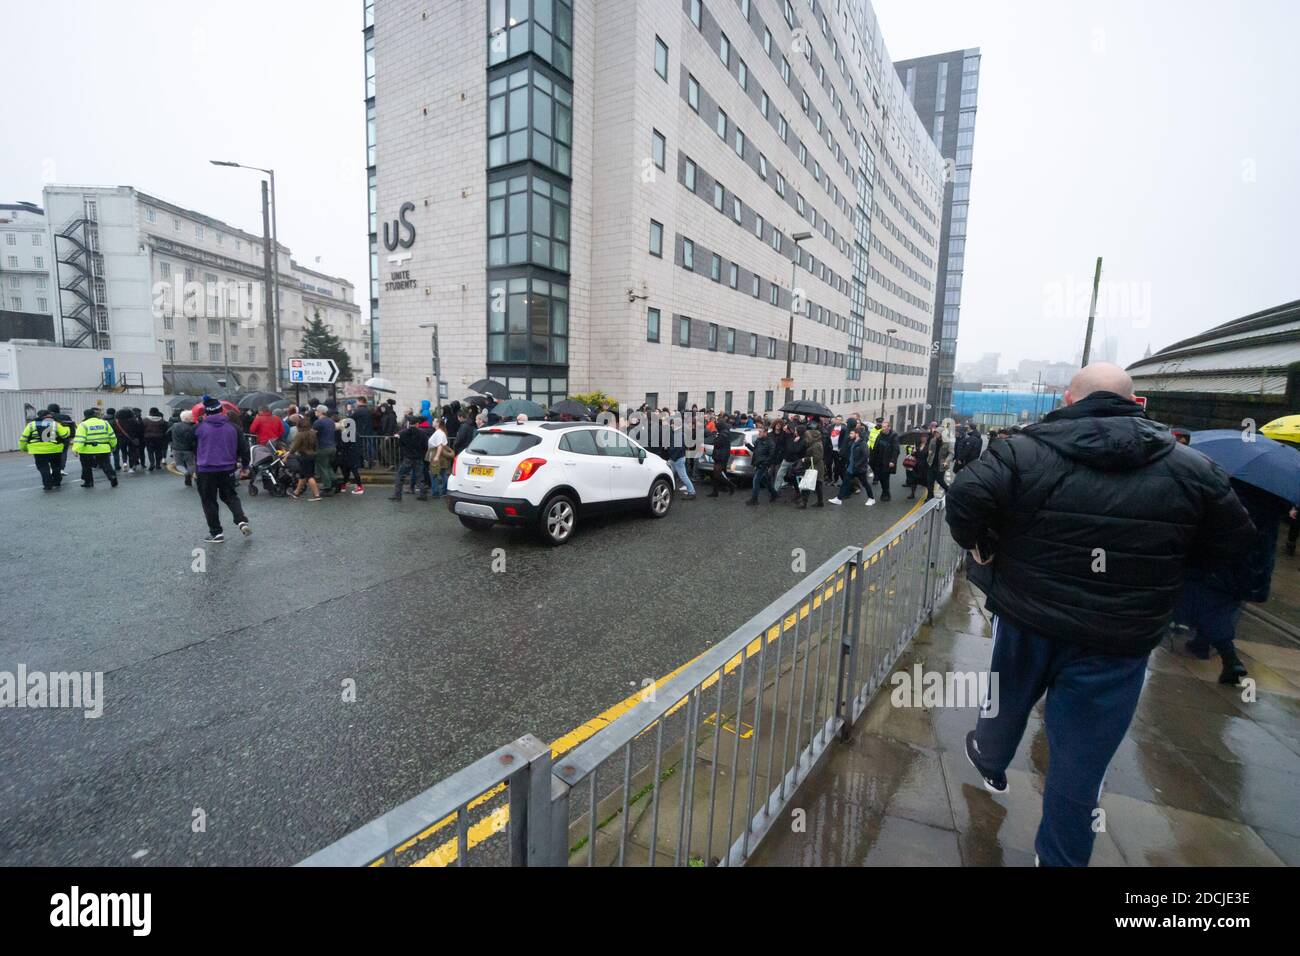 Skelhorne St, Liverpool, 21st Nov 2020: Anti lockdown protesters march across the road to Copperas Hill blocking traffic at Unite Students residences Stock Photo